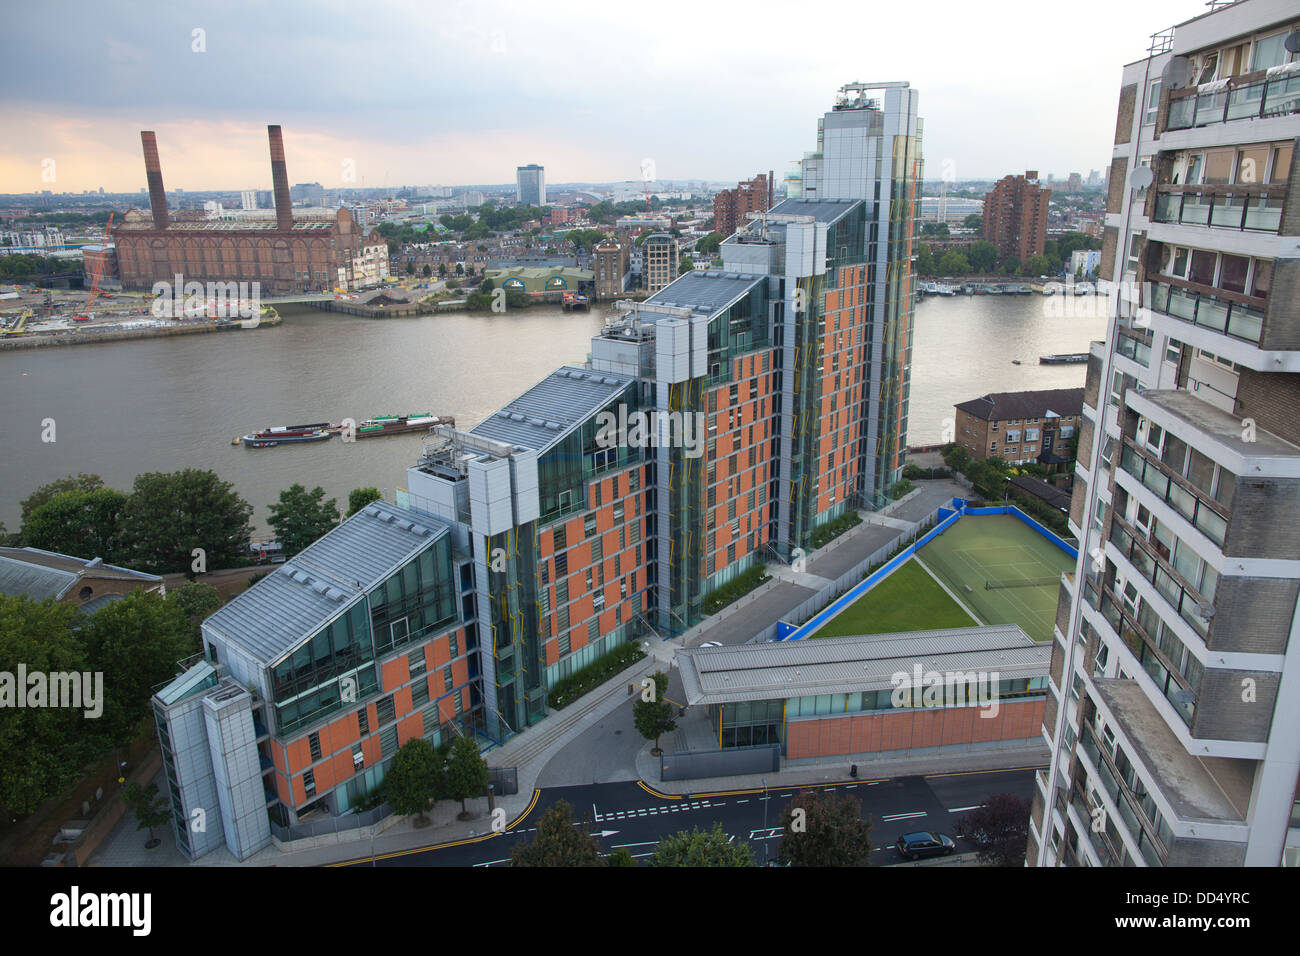 Montevetro building, luxury apartments designed by Richard Rogers overlooking the River Thames, Battersea Reach, Chelsea, London Stock Photo